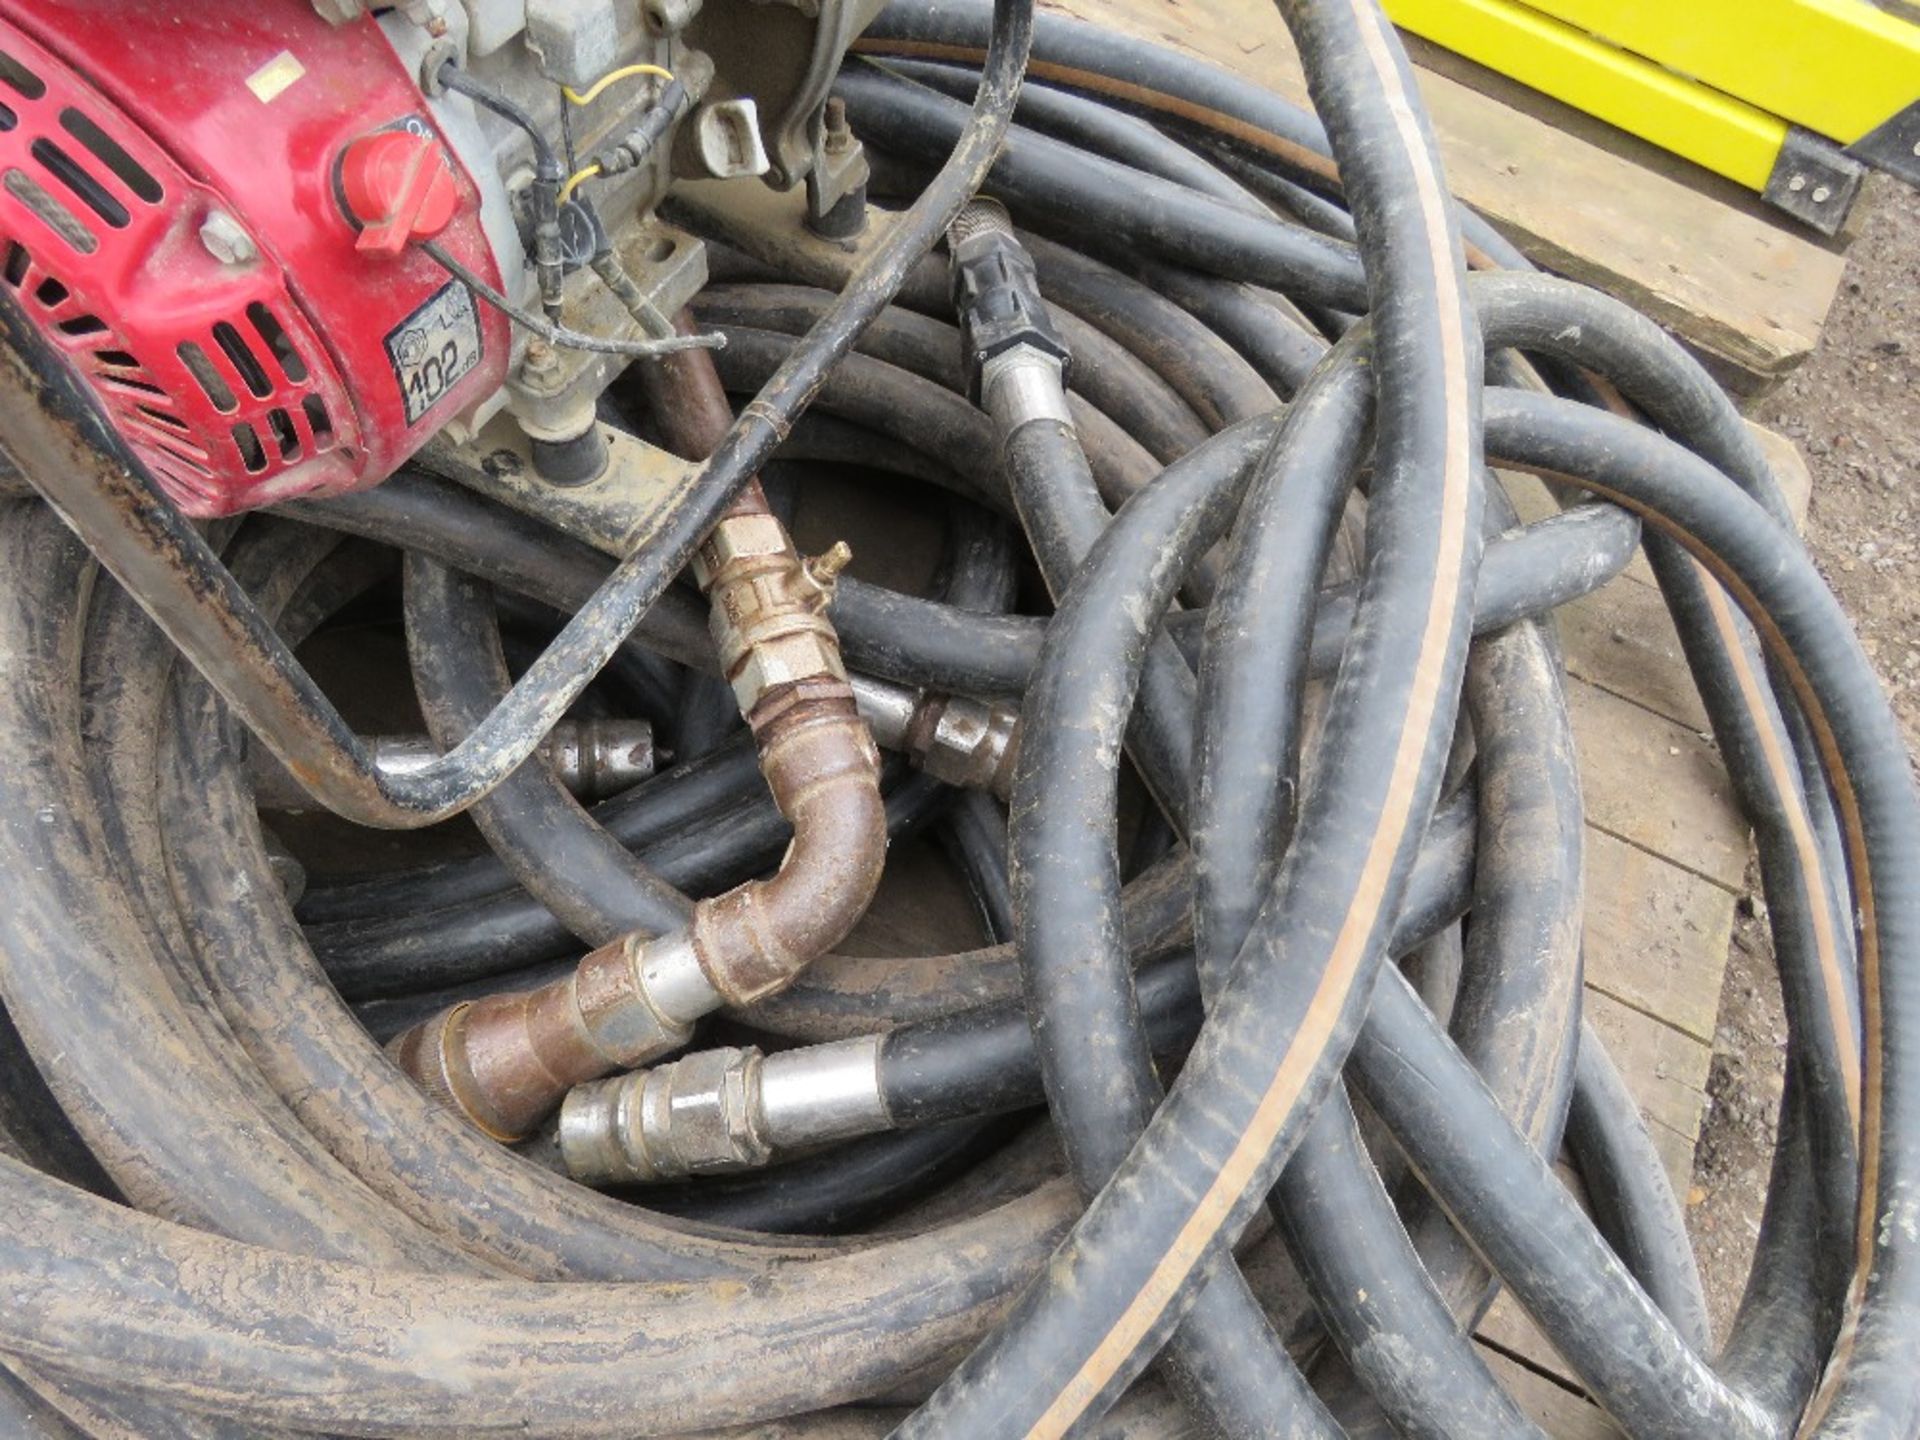 PETROL ENGINED FUEL TRANSFER PUMP PLUS A LARGE QUANTITY OF HOSE. SOURCED FROM COMPANY LIQUIDATION. - Image 4 of 7